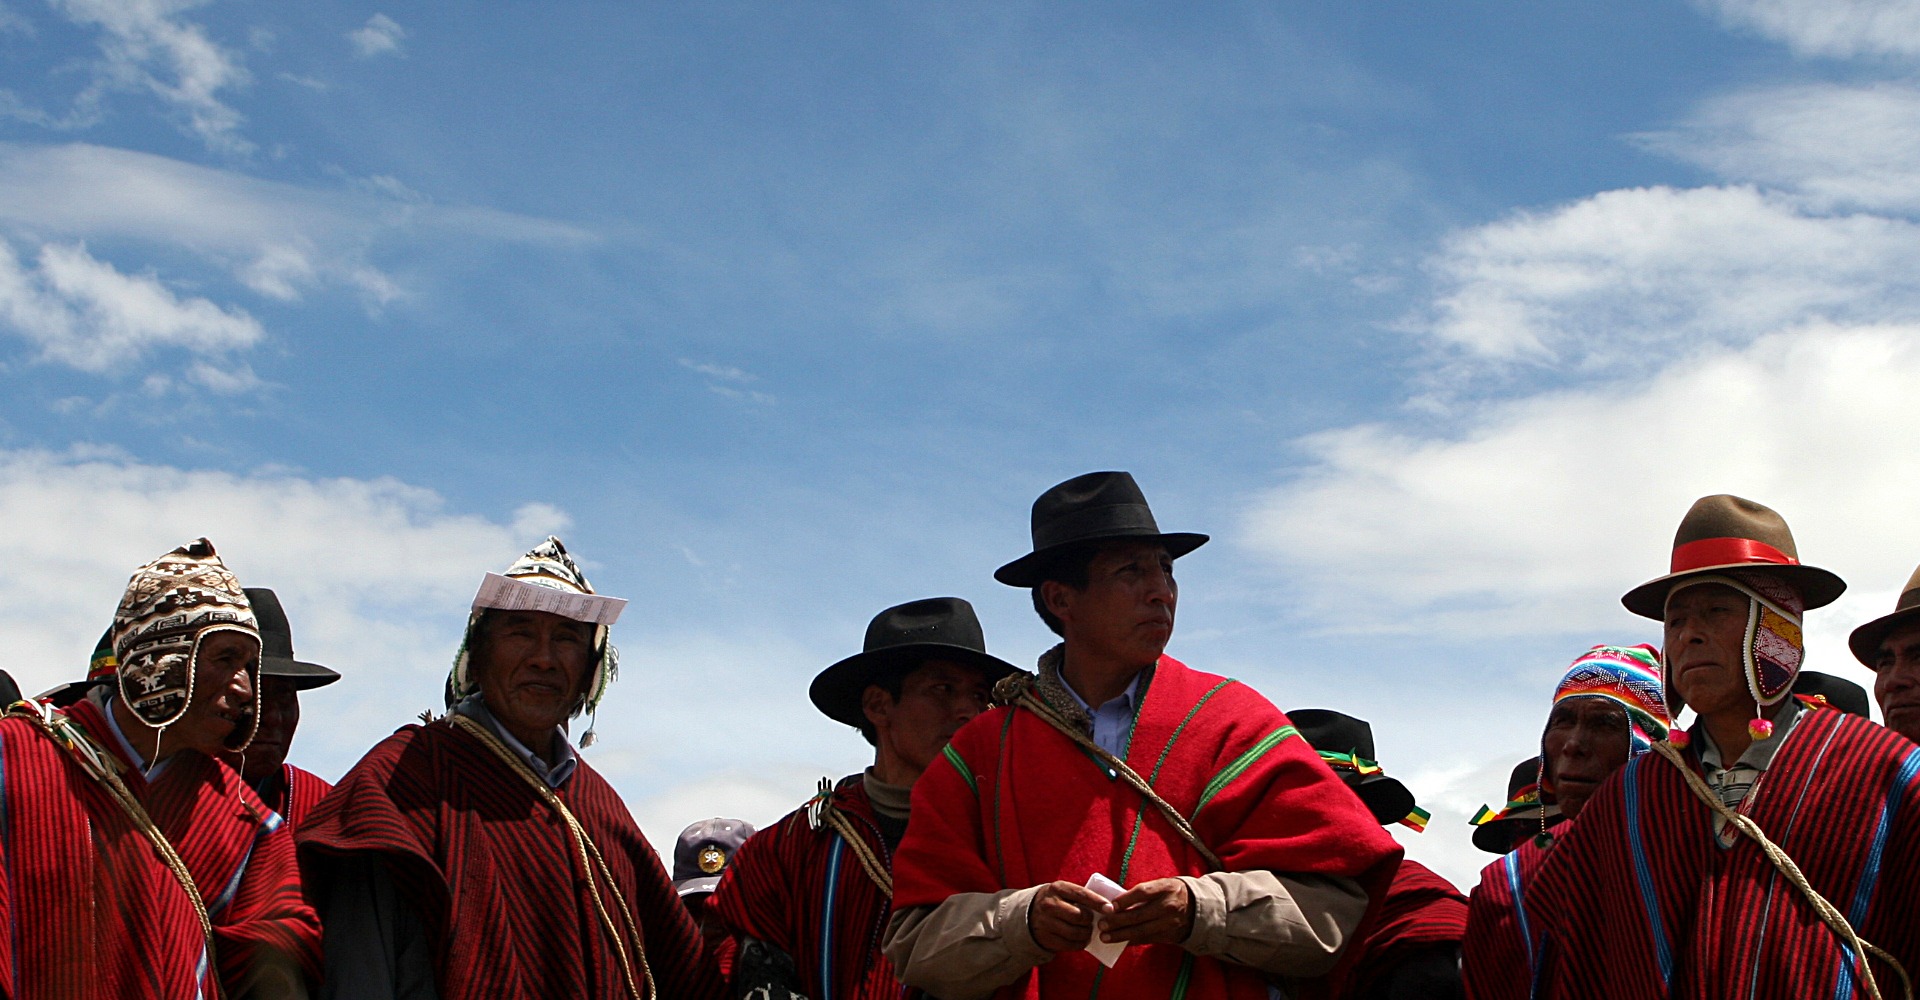 Indigenous peoples in Bolivia